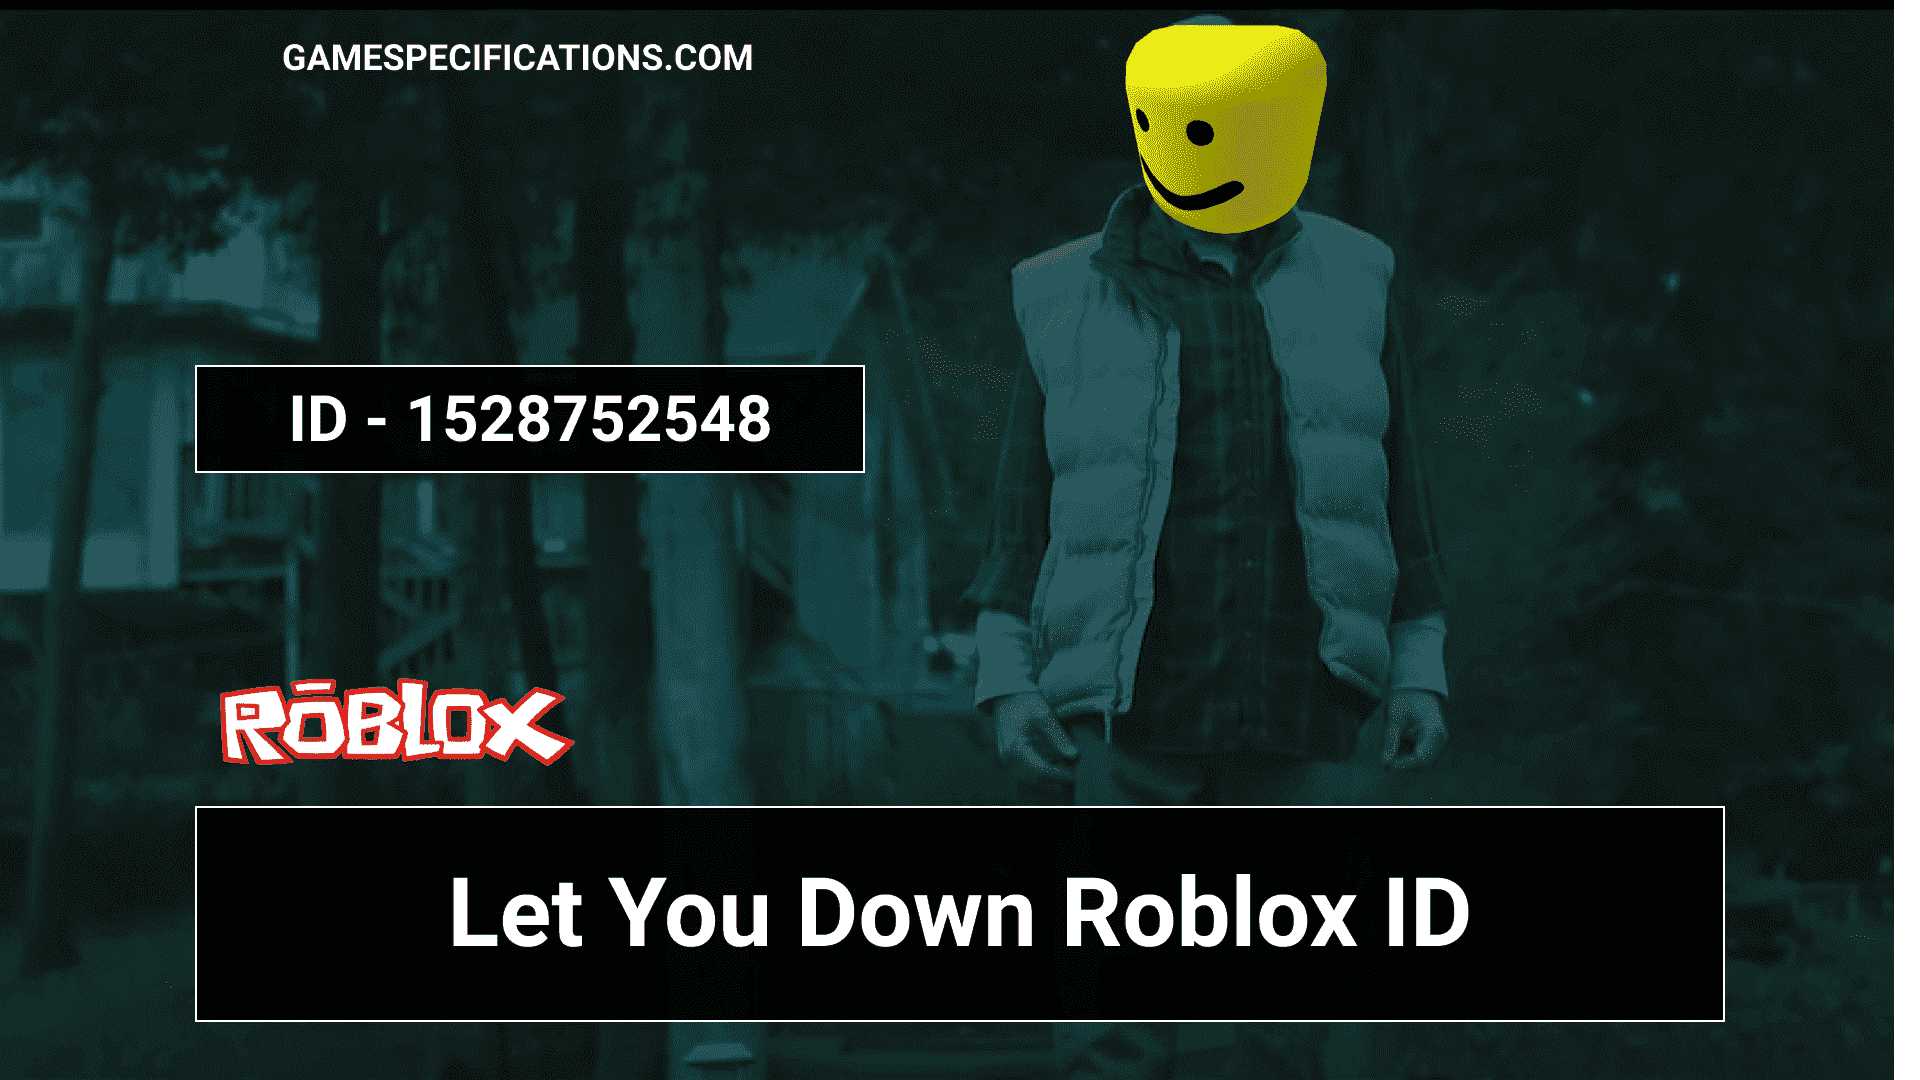 Let You Down Roblox Id Codes To Play The Nf Music 2021 Game Specifications - are roblox servers down 2021